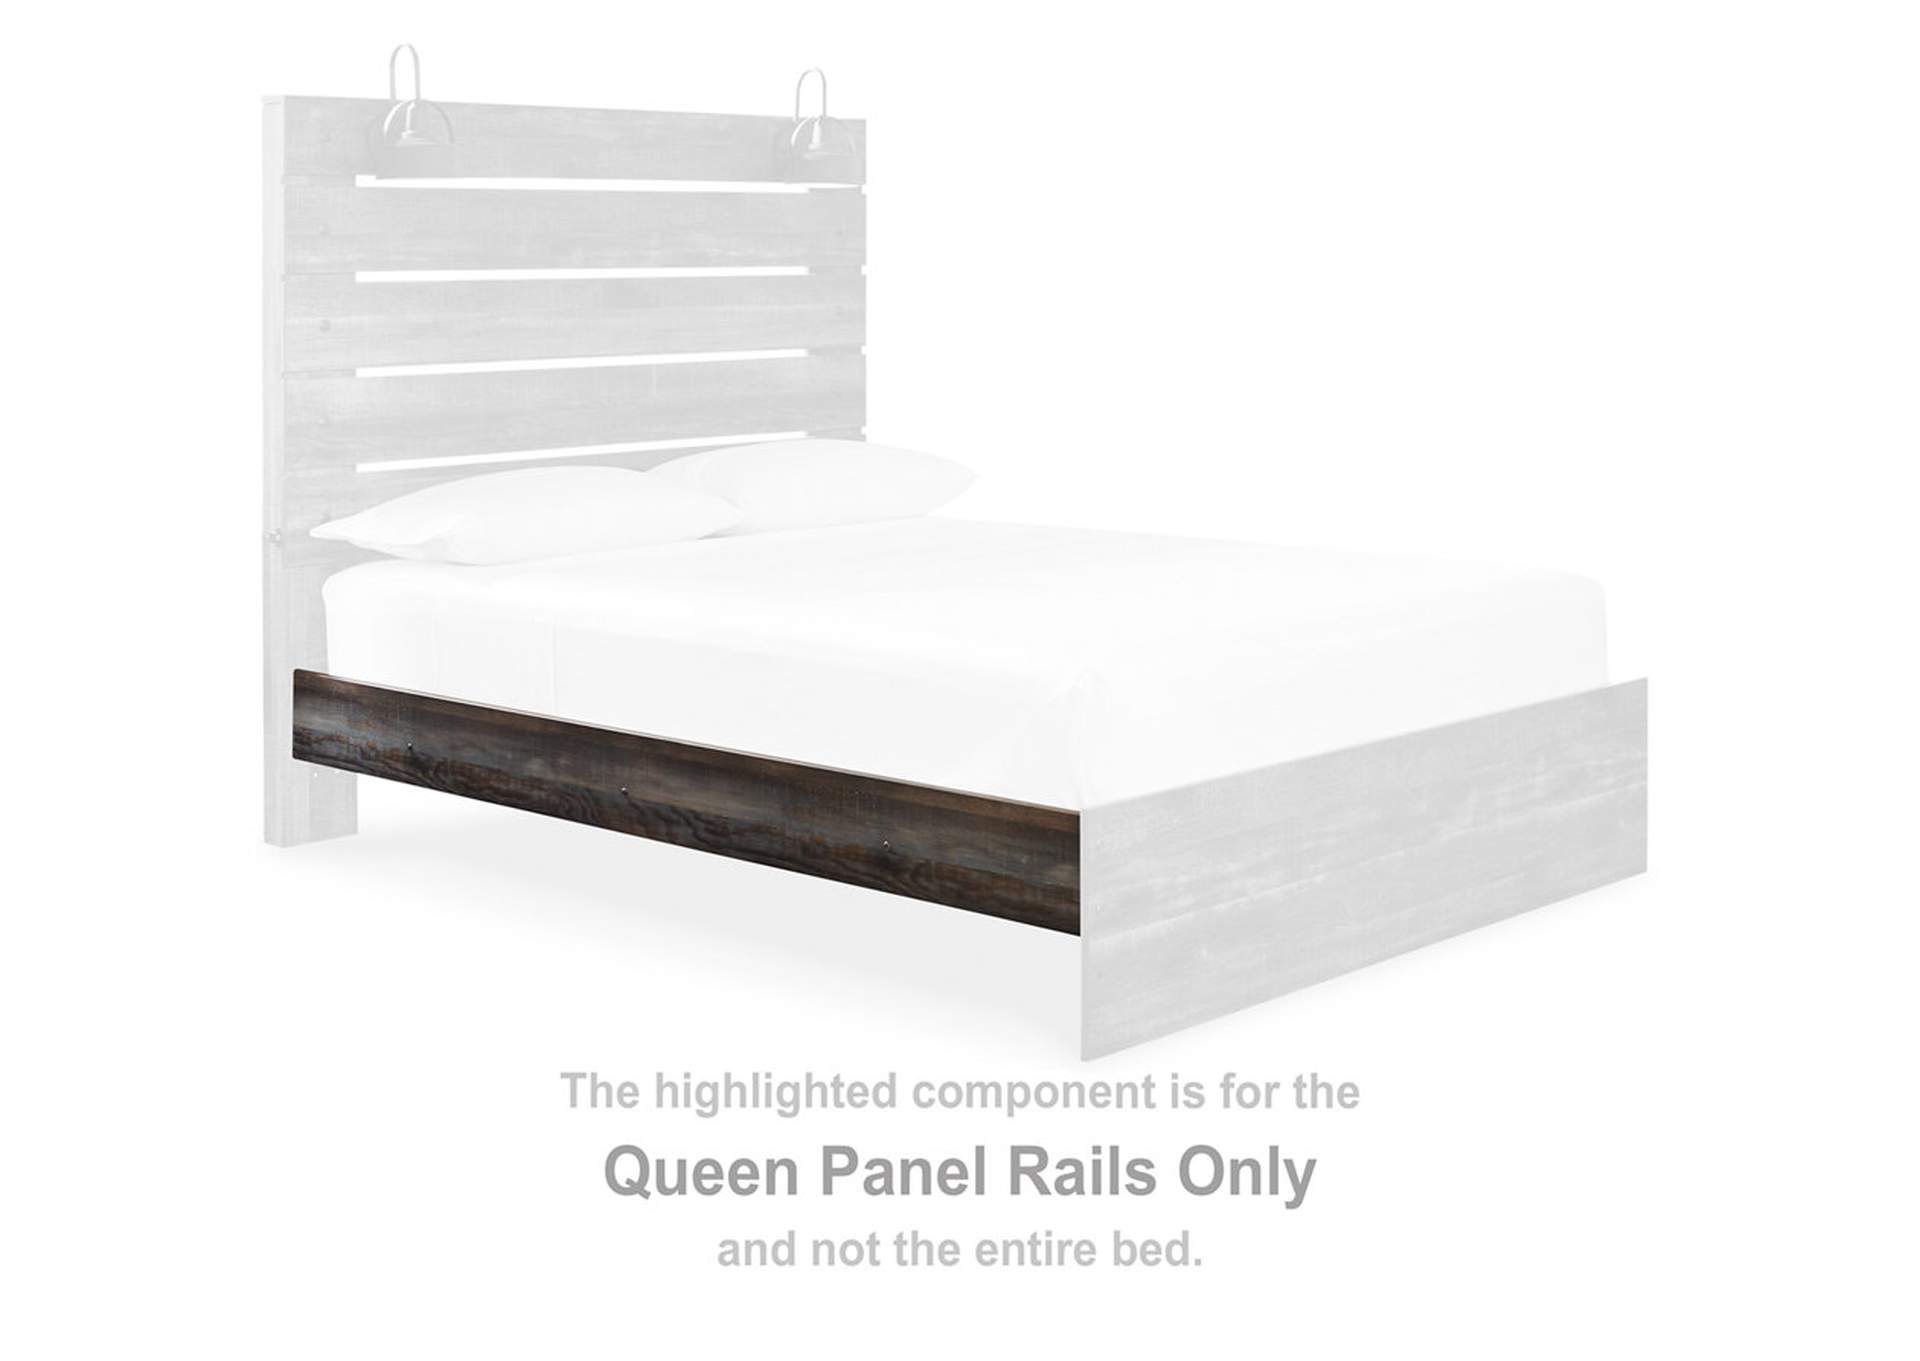 Drystan Queen Panel Bed, Dresser, Mirror, Chest and Nightstand,Signature Design By Ashley